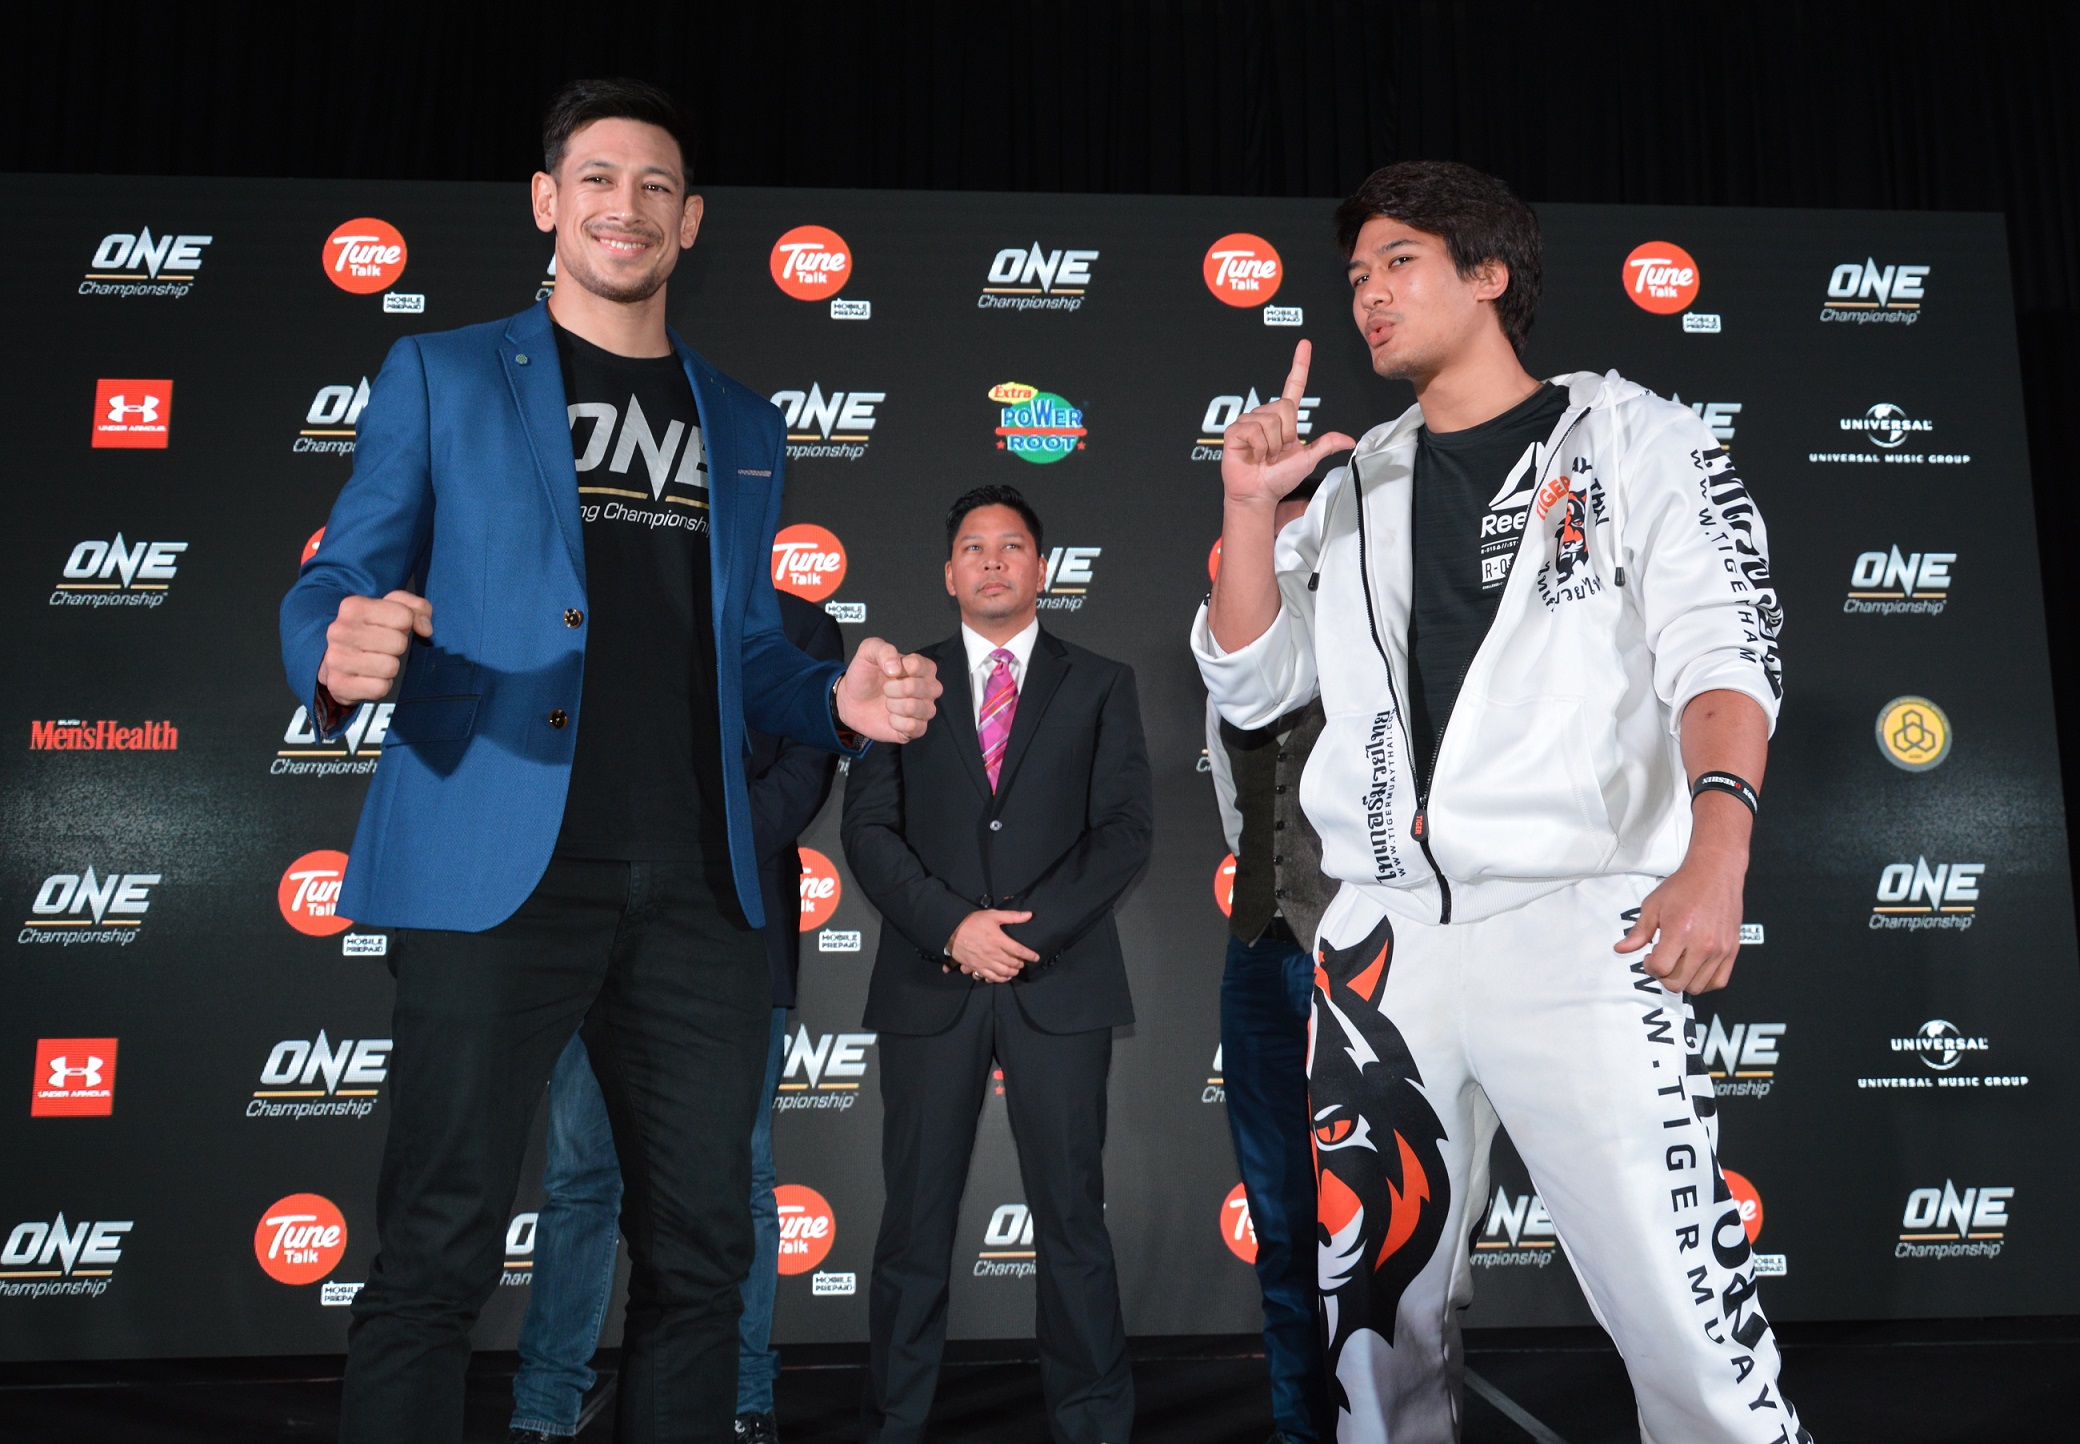 Peter Davis (Left) and Shannon “One Shin” Wiratchai (Right) taking on the fans while Victor Cui, CEO of ONE Championship looks on.